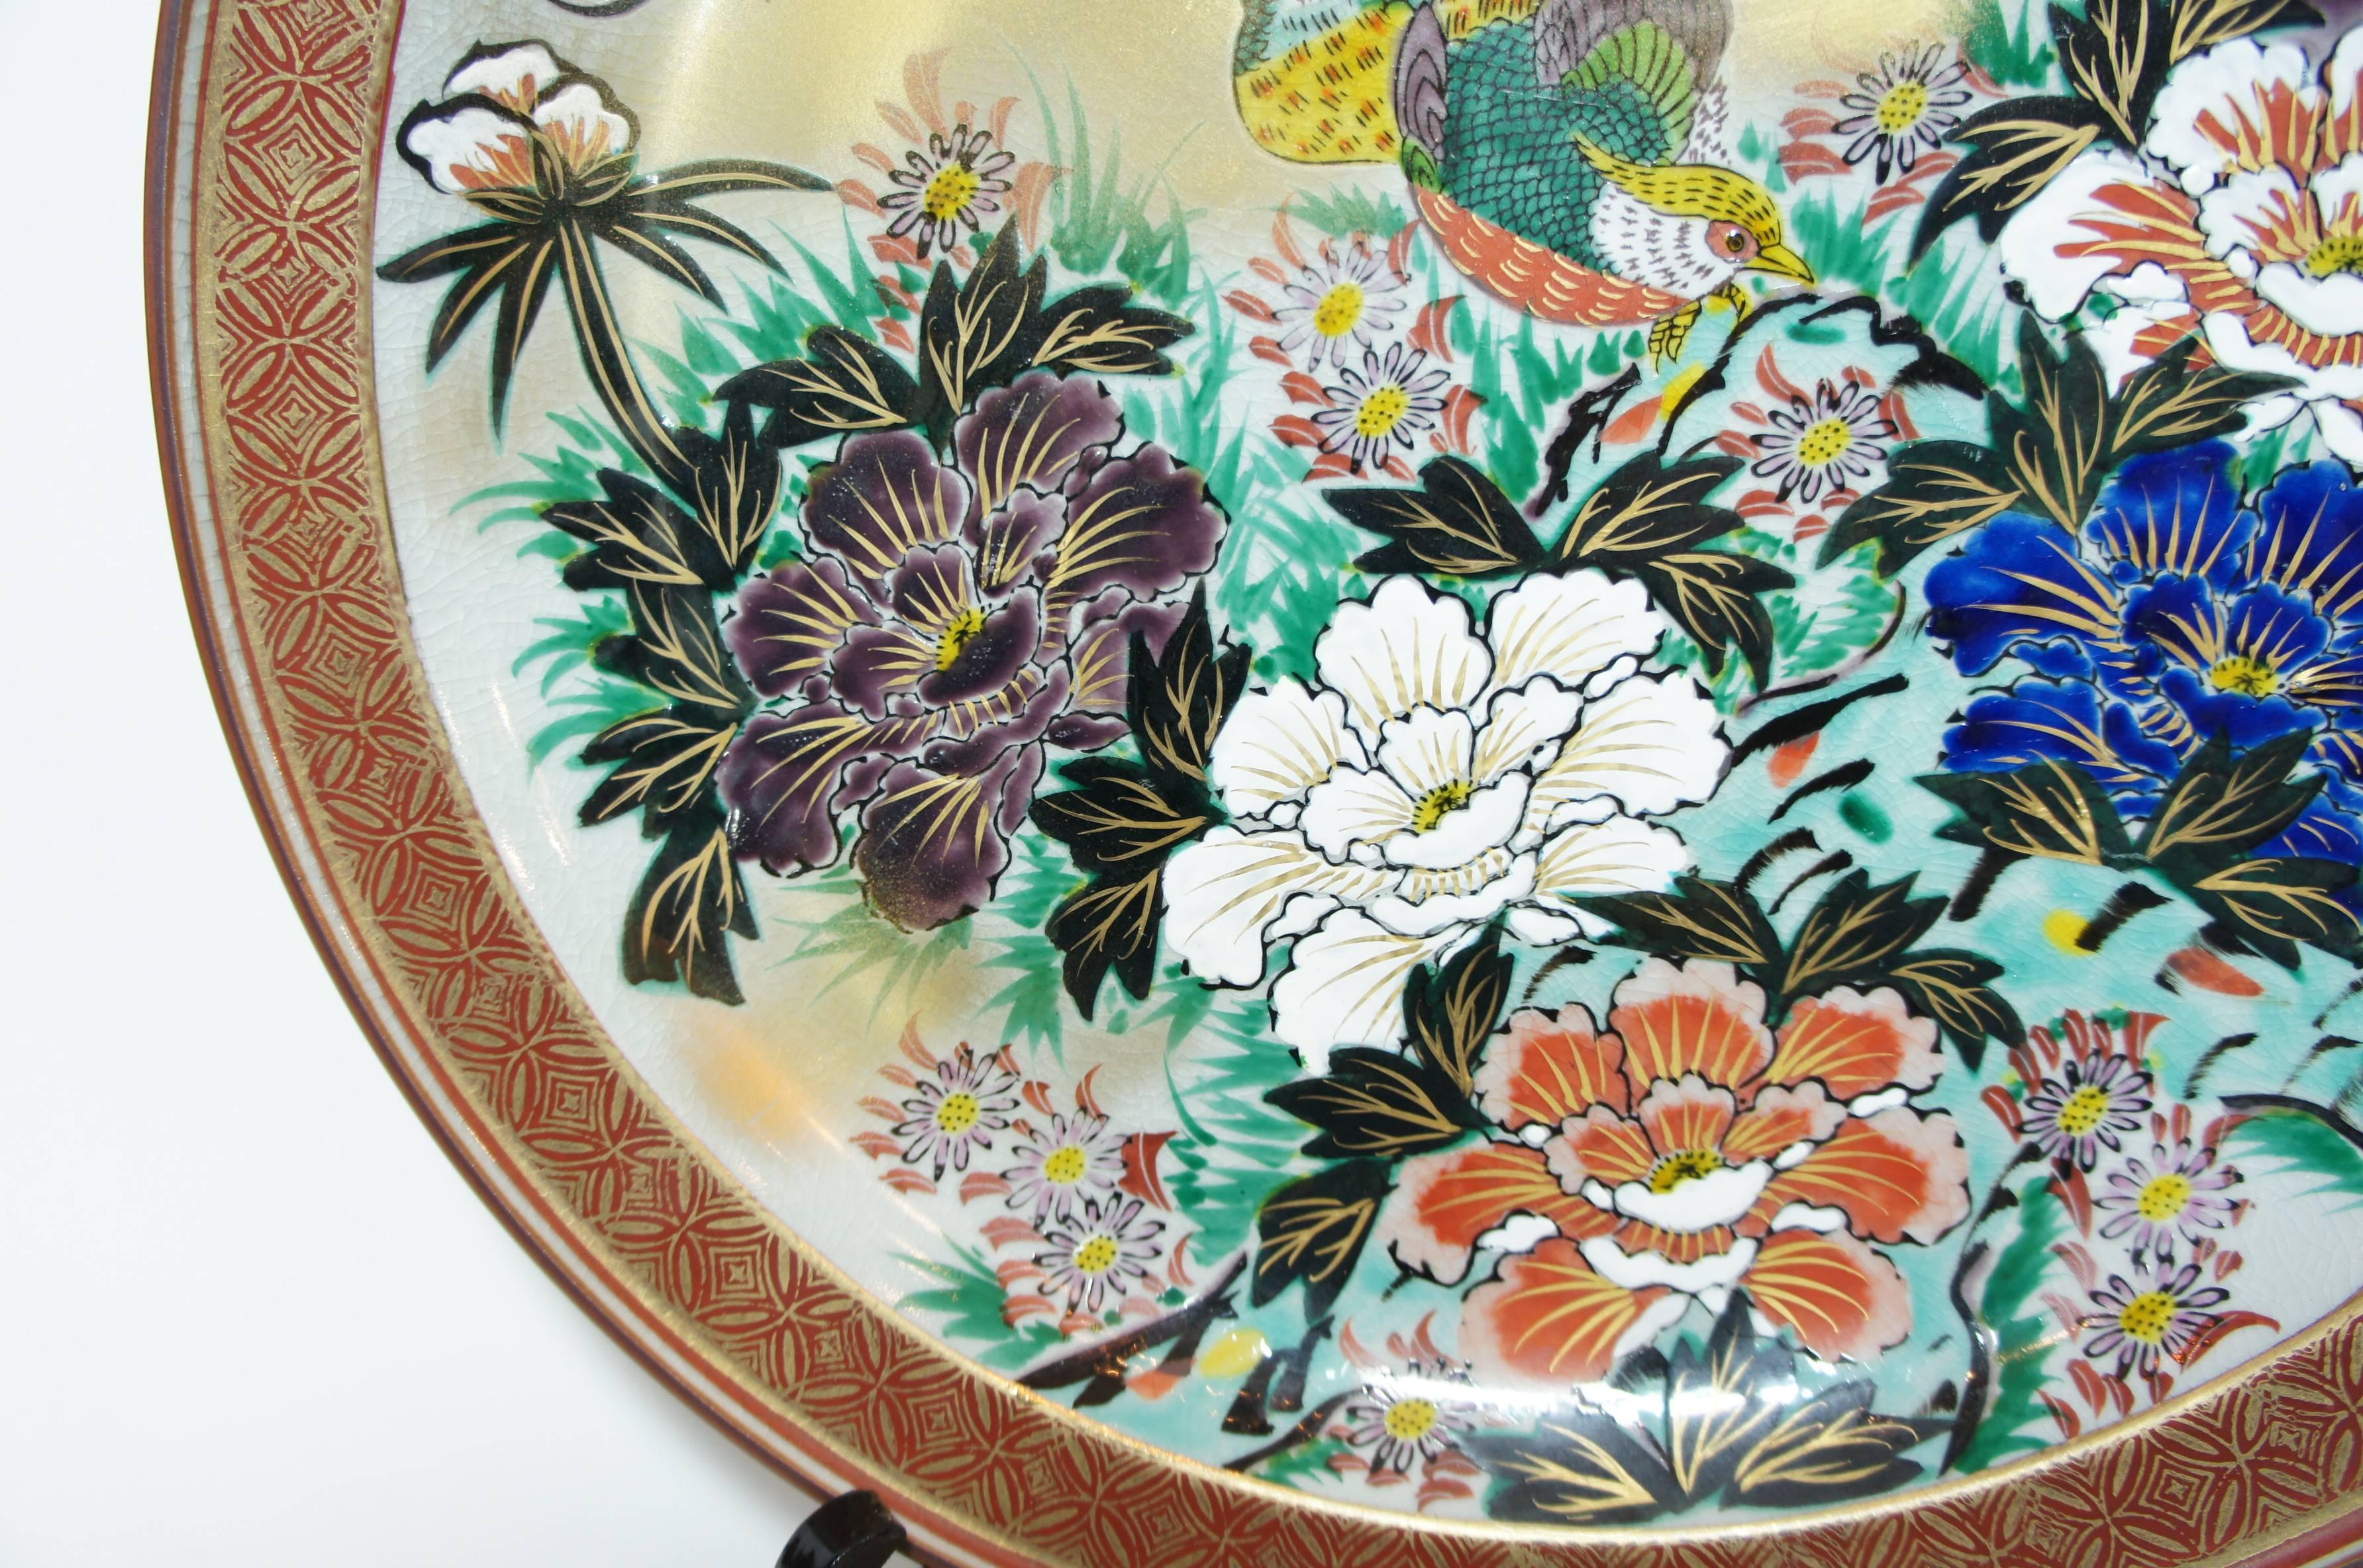 Hand-Crafted Japanese Peony and Birds Painting on Porcelain Kutani Large Plate, 1950s For Sale